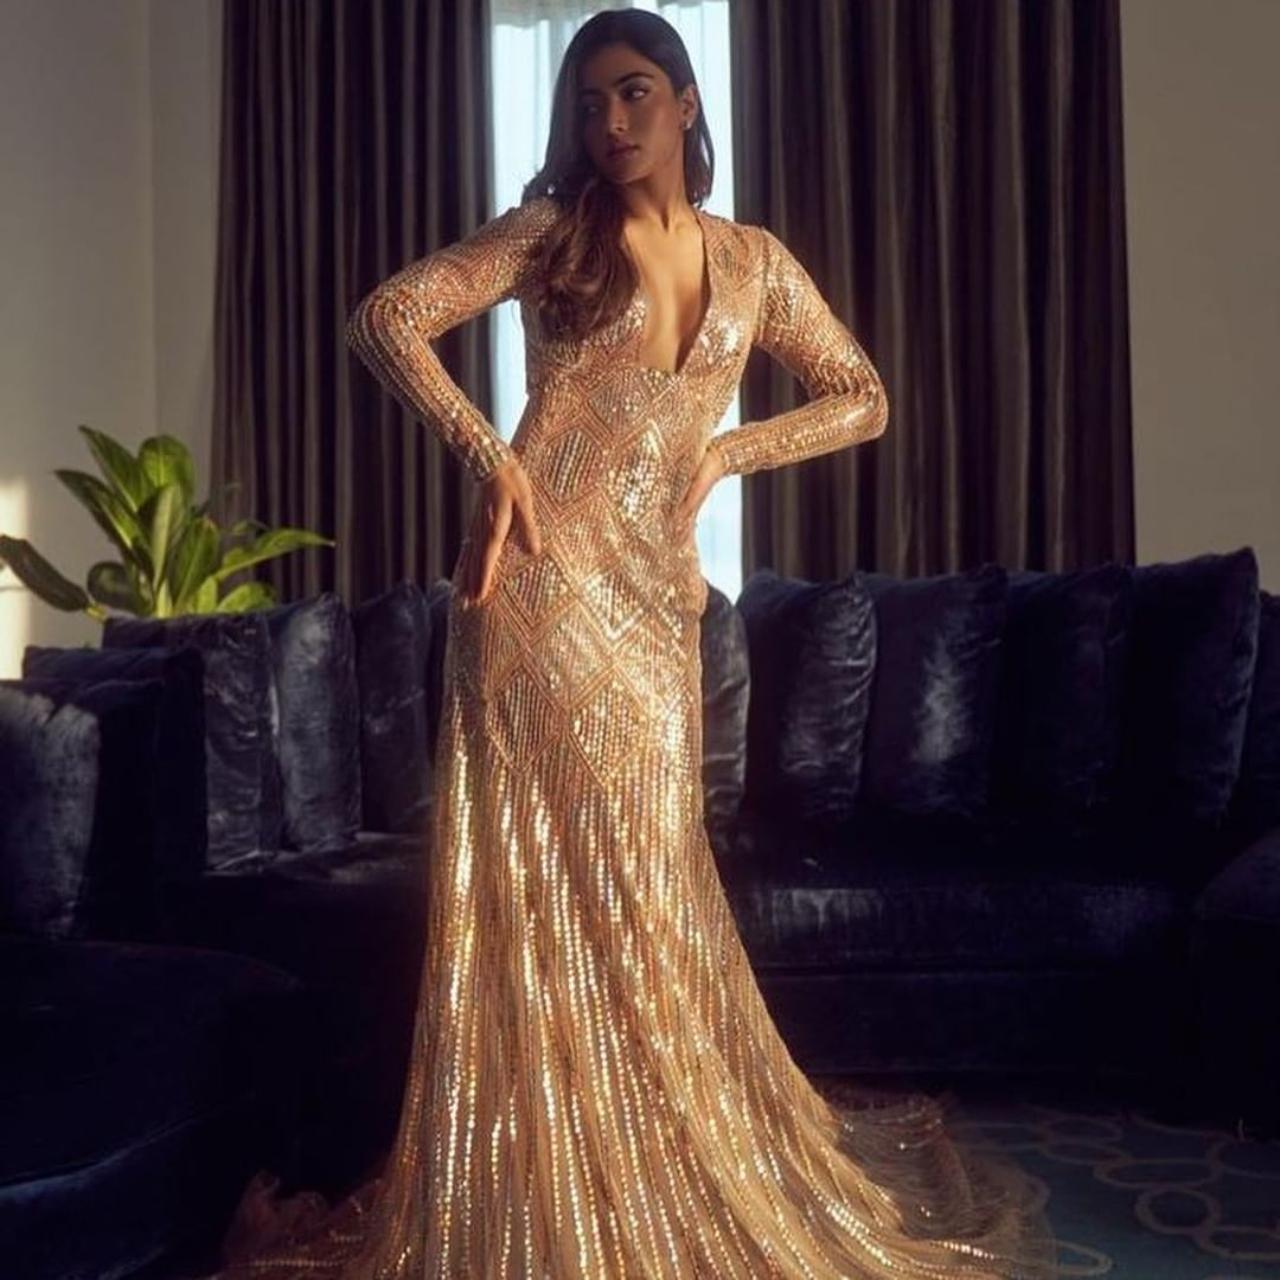 Rashmika Mandanna has been shining bright with her work and has also been acing her fashion game. The actress looked stunning in this gold gown that perfectly fits her curves